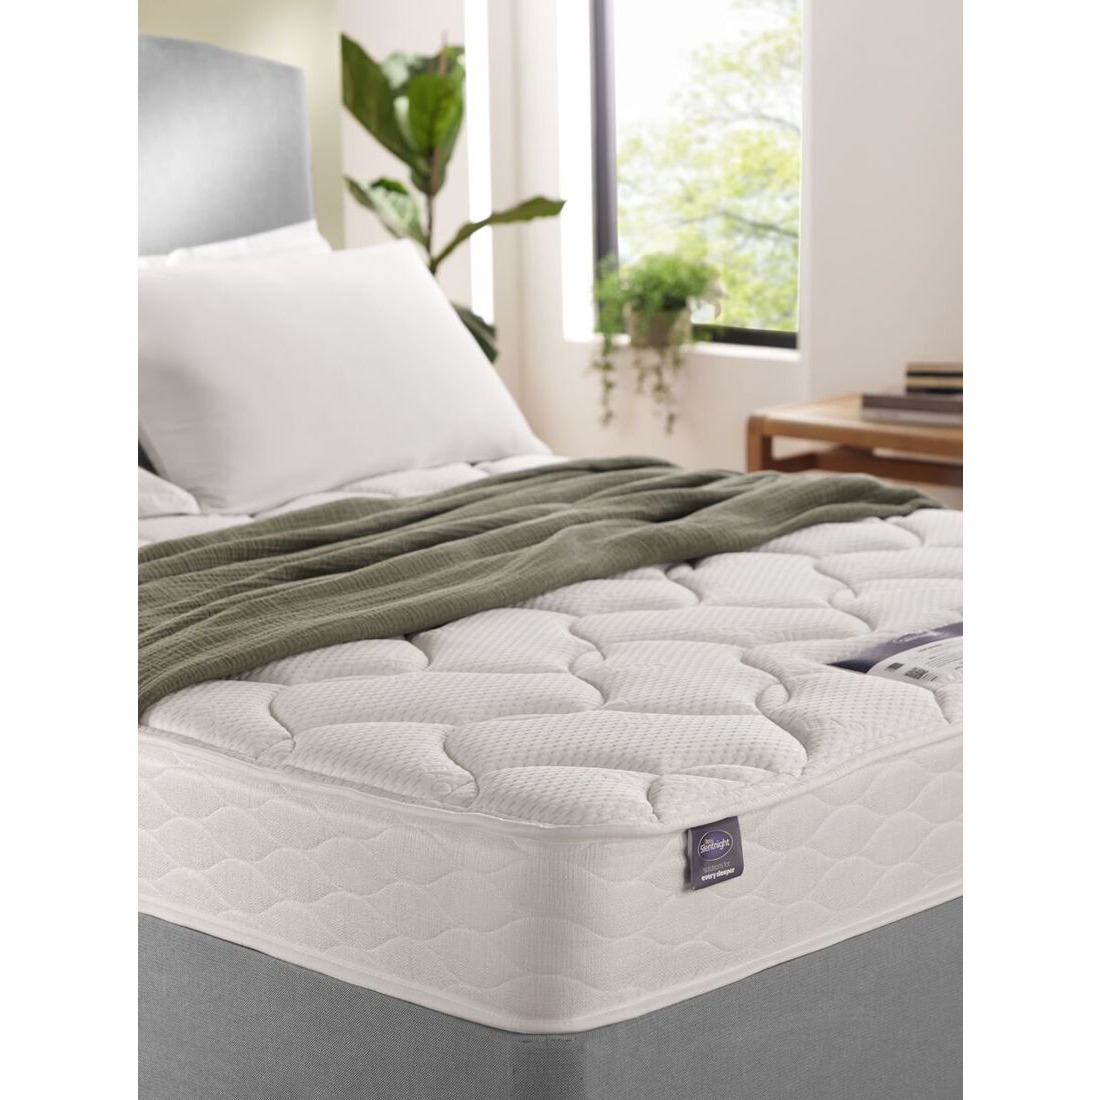 Silentnight Recover Open Coil Mattress, Firm Tension, Double - image 1